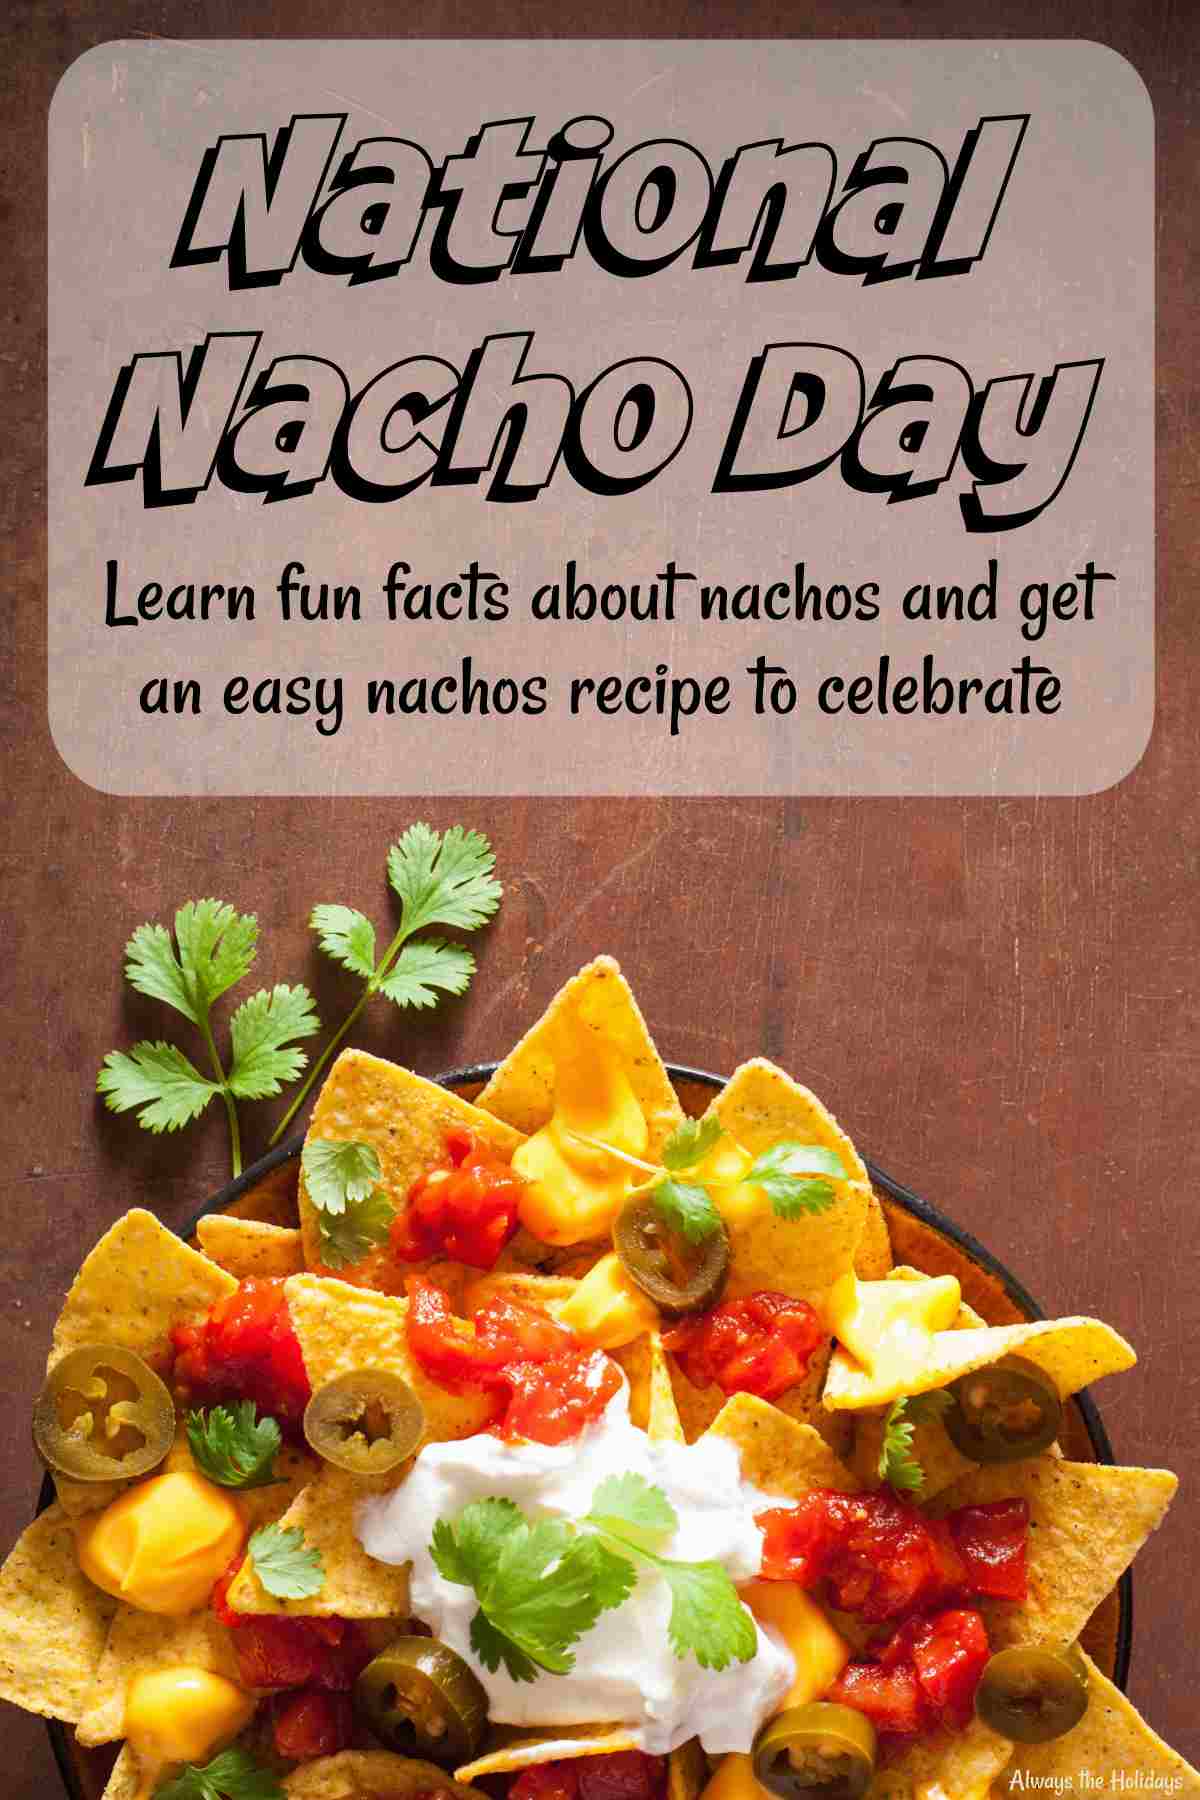 A distressed brown background with a plate of homemade nachos at the bottom, and a text overlay at the top that say "National Nacho Day - Learn fun facts about nachos and get an easy nachos recipe to celebrate".